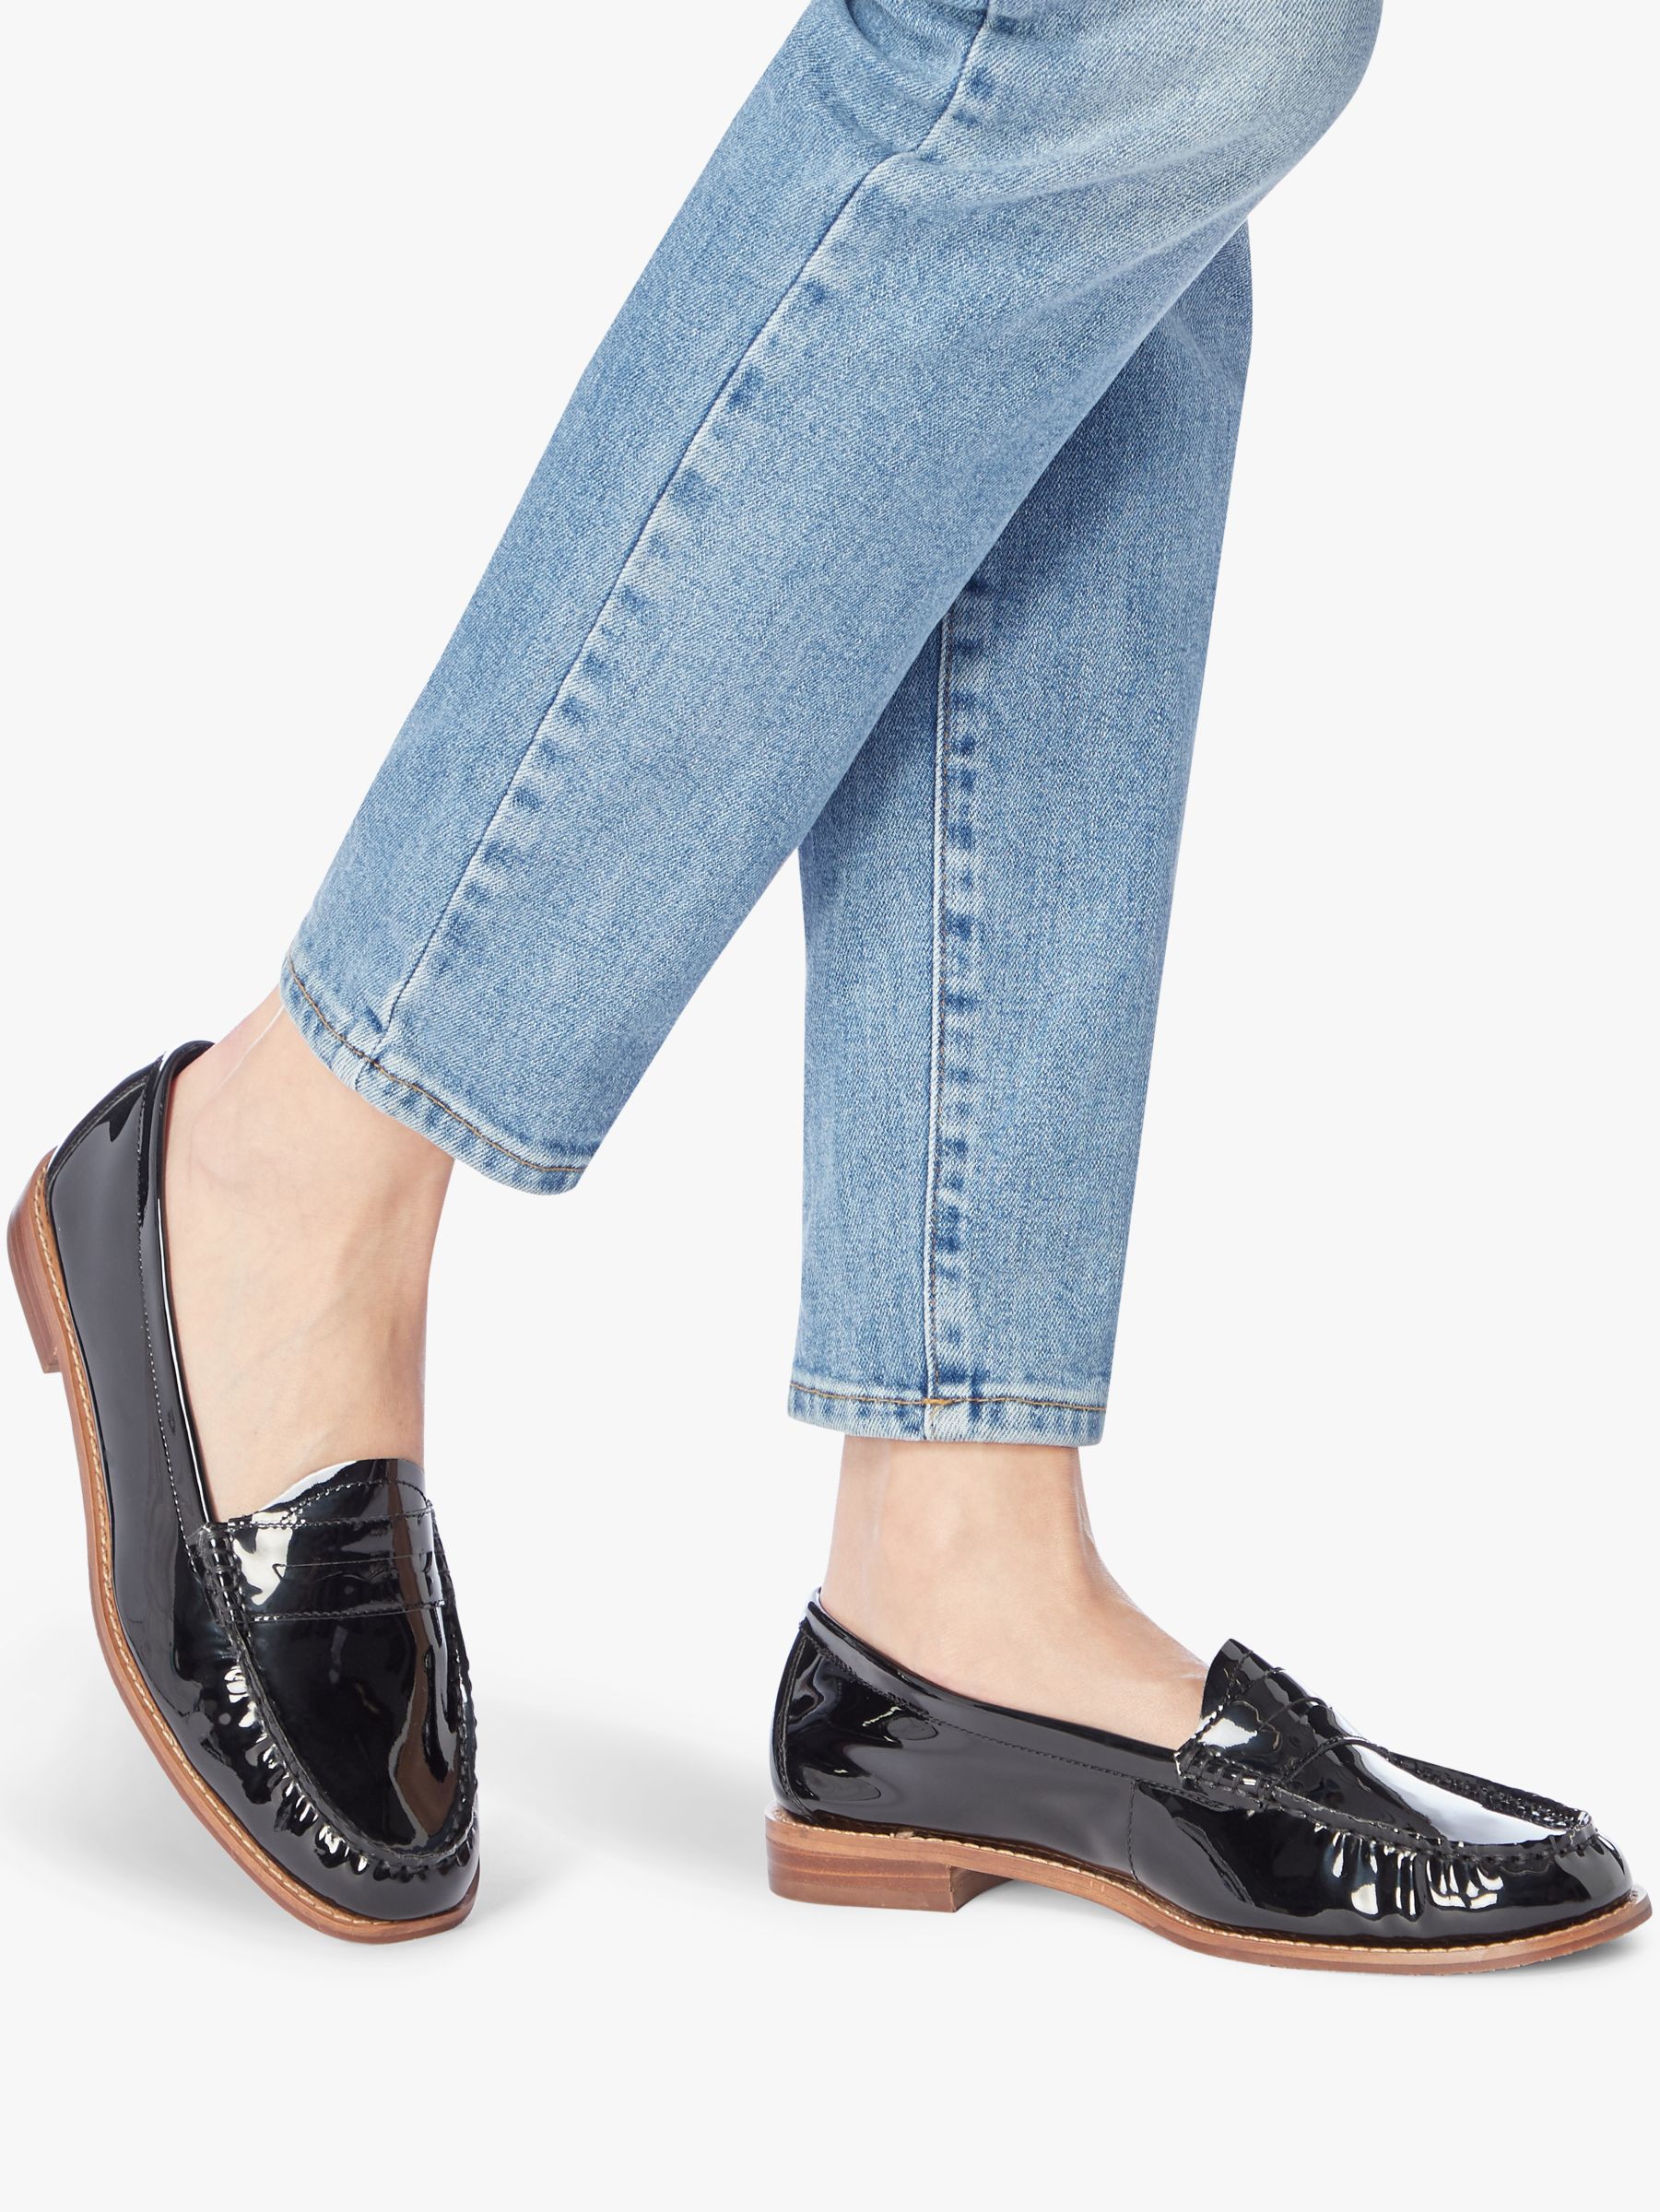 Dune Glossy Loafers at John Lewis 